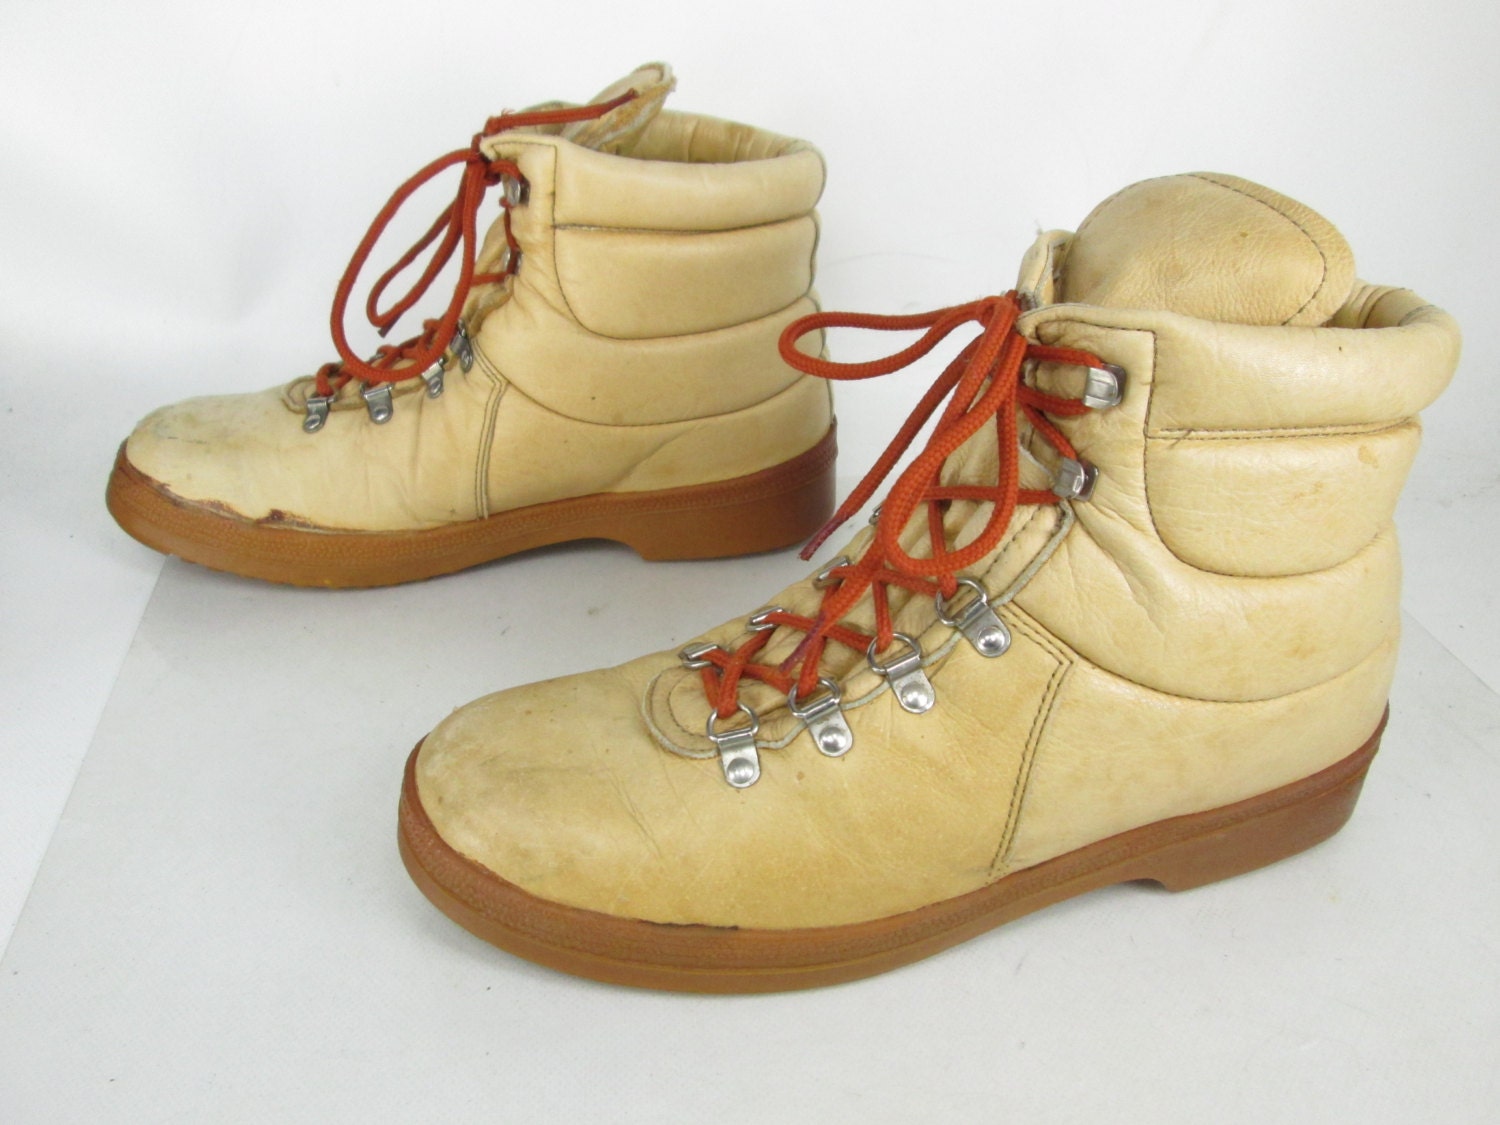 Mens Vintage Tan Leather Hiking Trail Lace Up Ankle Boots Sz 10 1/2 ...